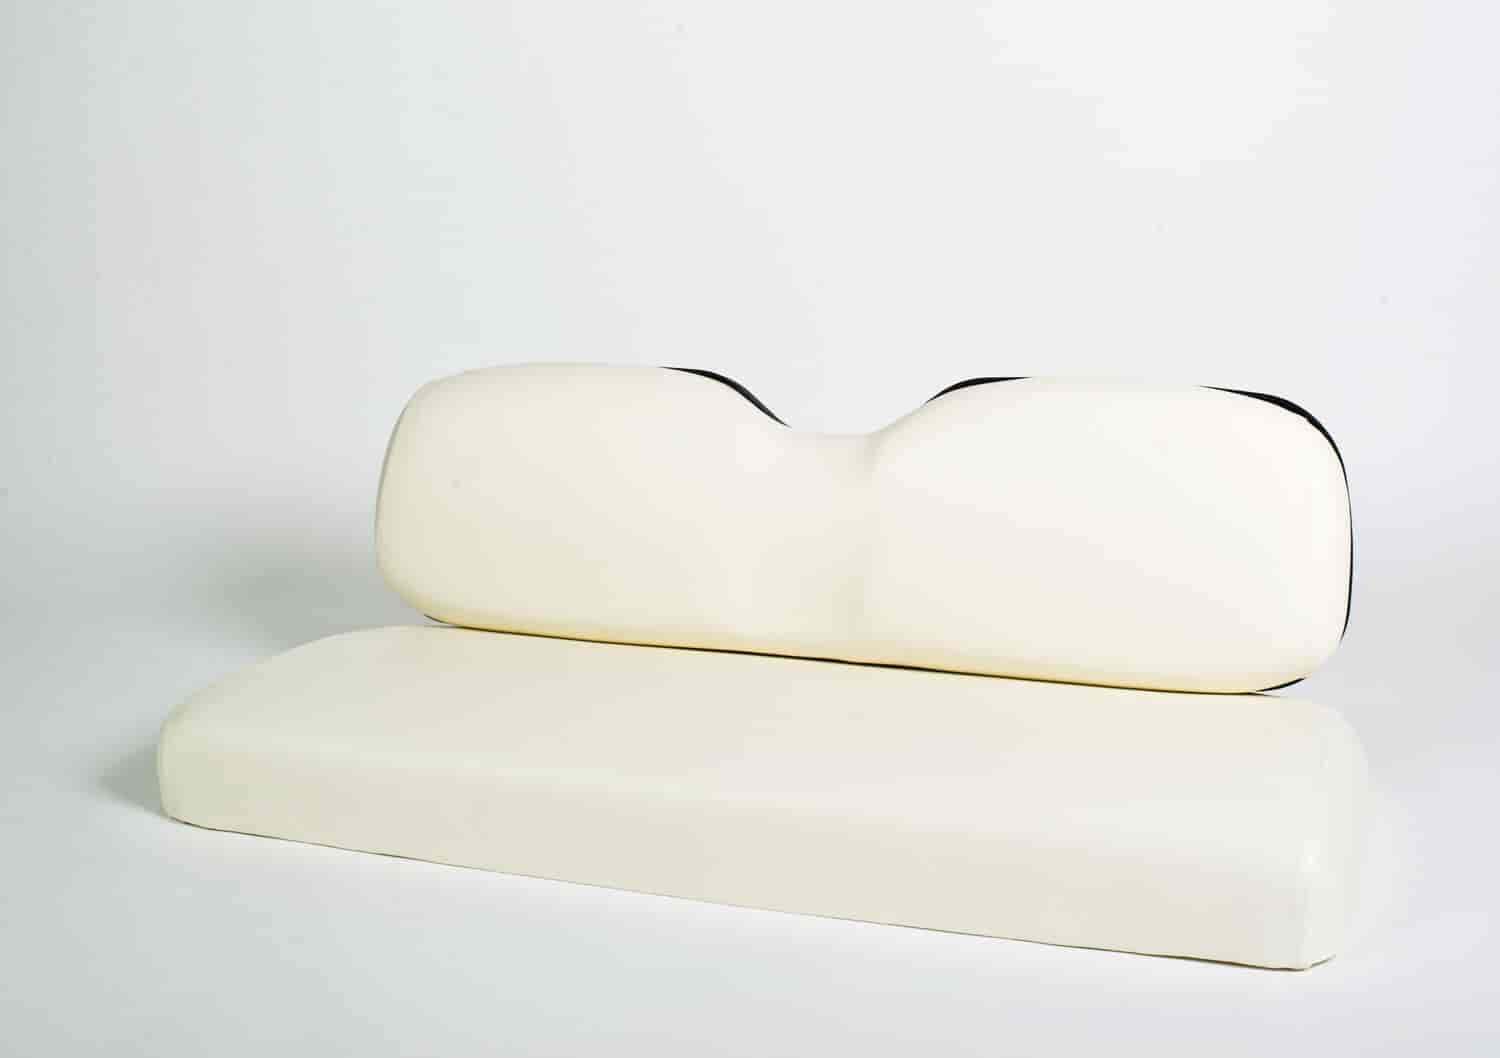 Designed for our rear 2n1 flip seats these high quality molded cushions feature Omnova marine-grade